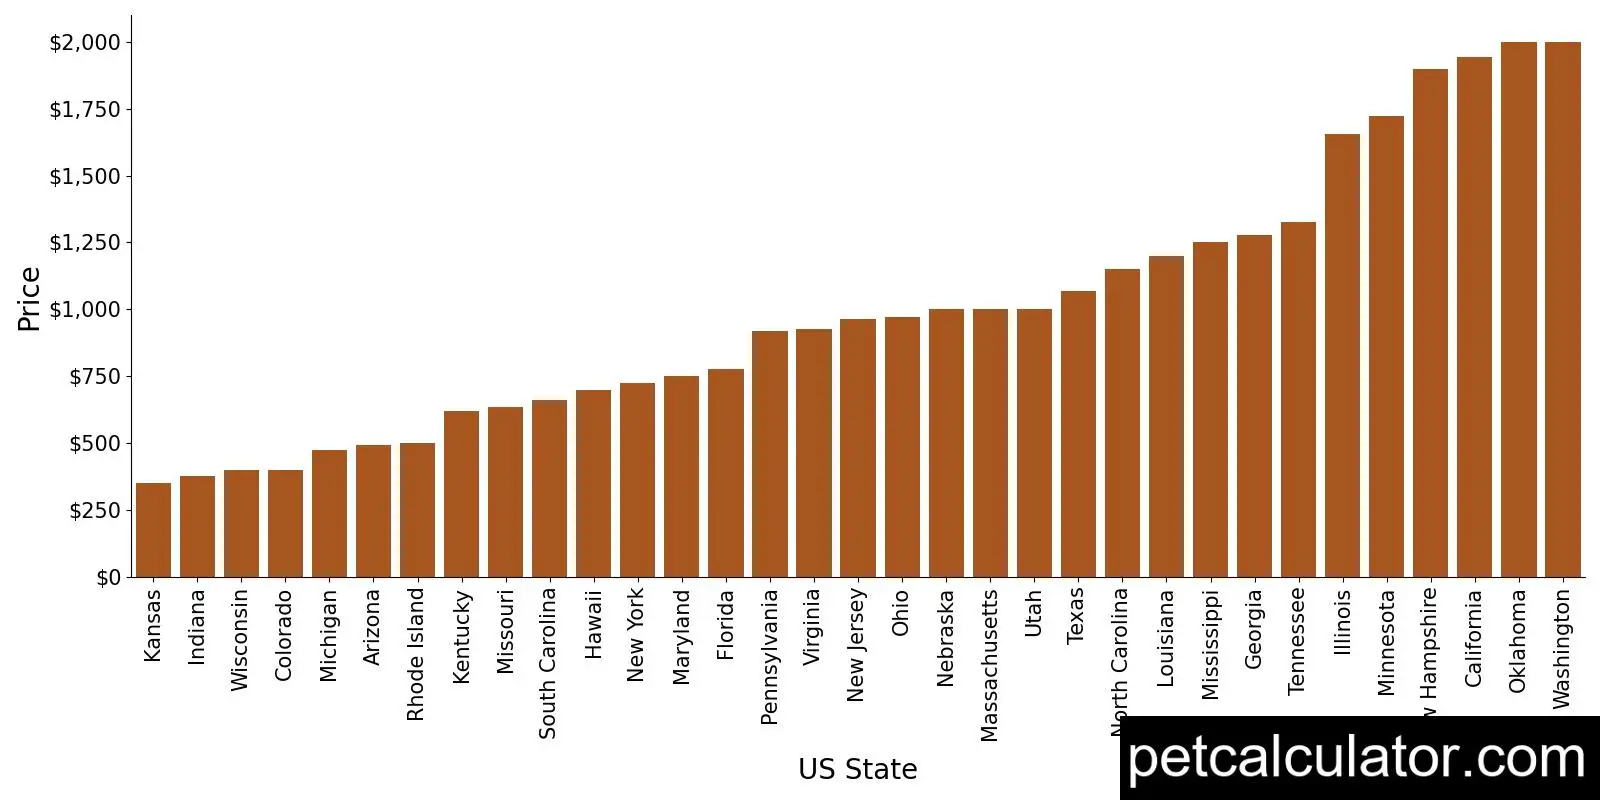 Price of American Staffordshire Terrier by US State 